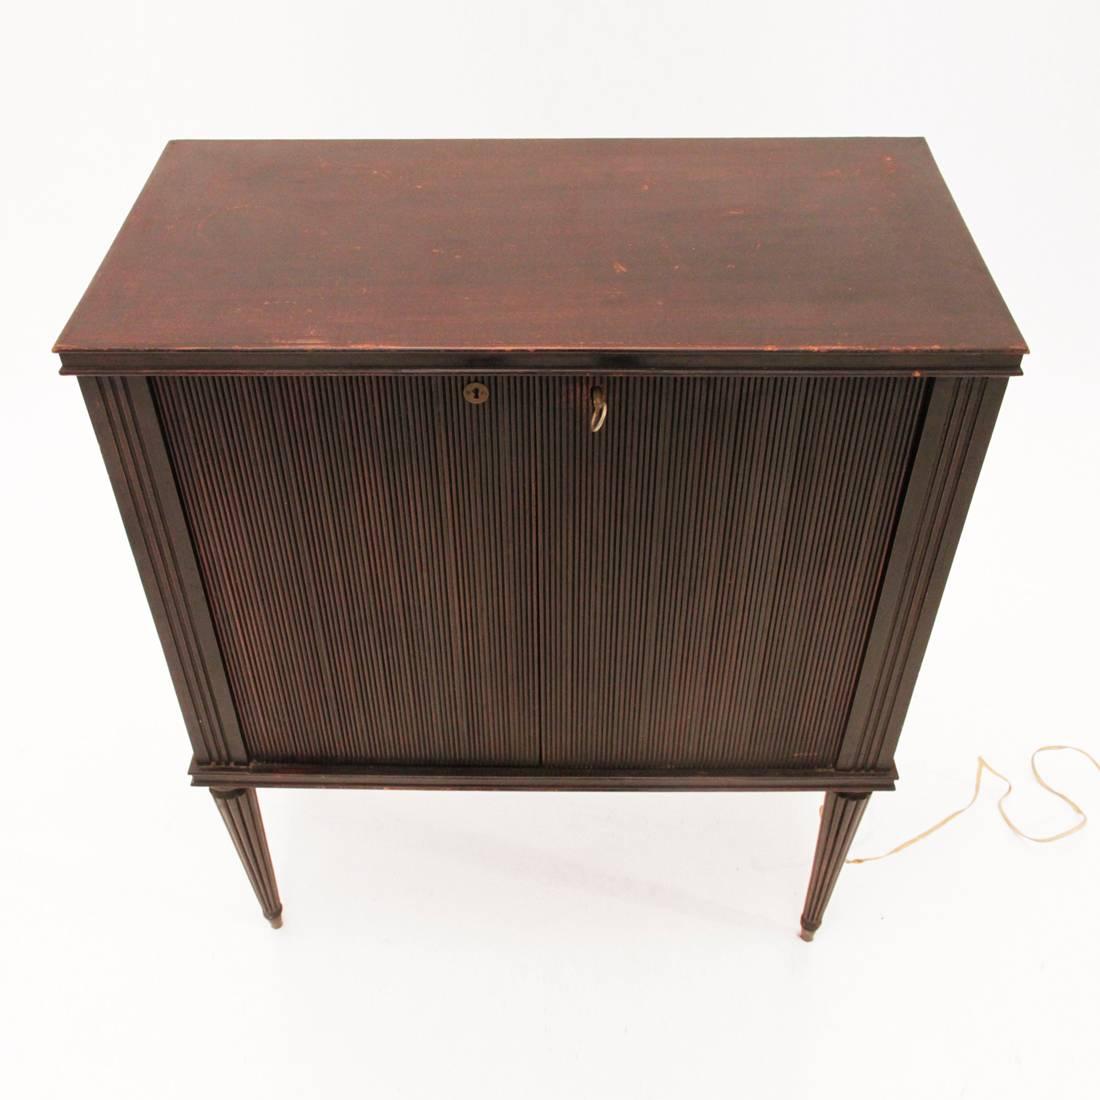 This wooden bar cabinet was manufactured in Italy during the 1940s and features two wooden ribbed doors, an interior magazine bar surrounded by mirrors, an interior electric bulb for lighting and tapered legs with brass feet.